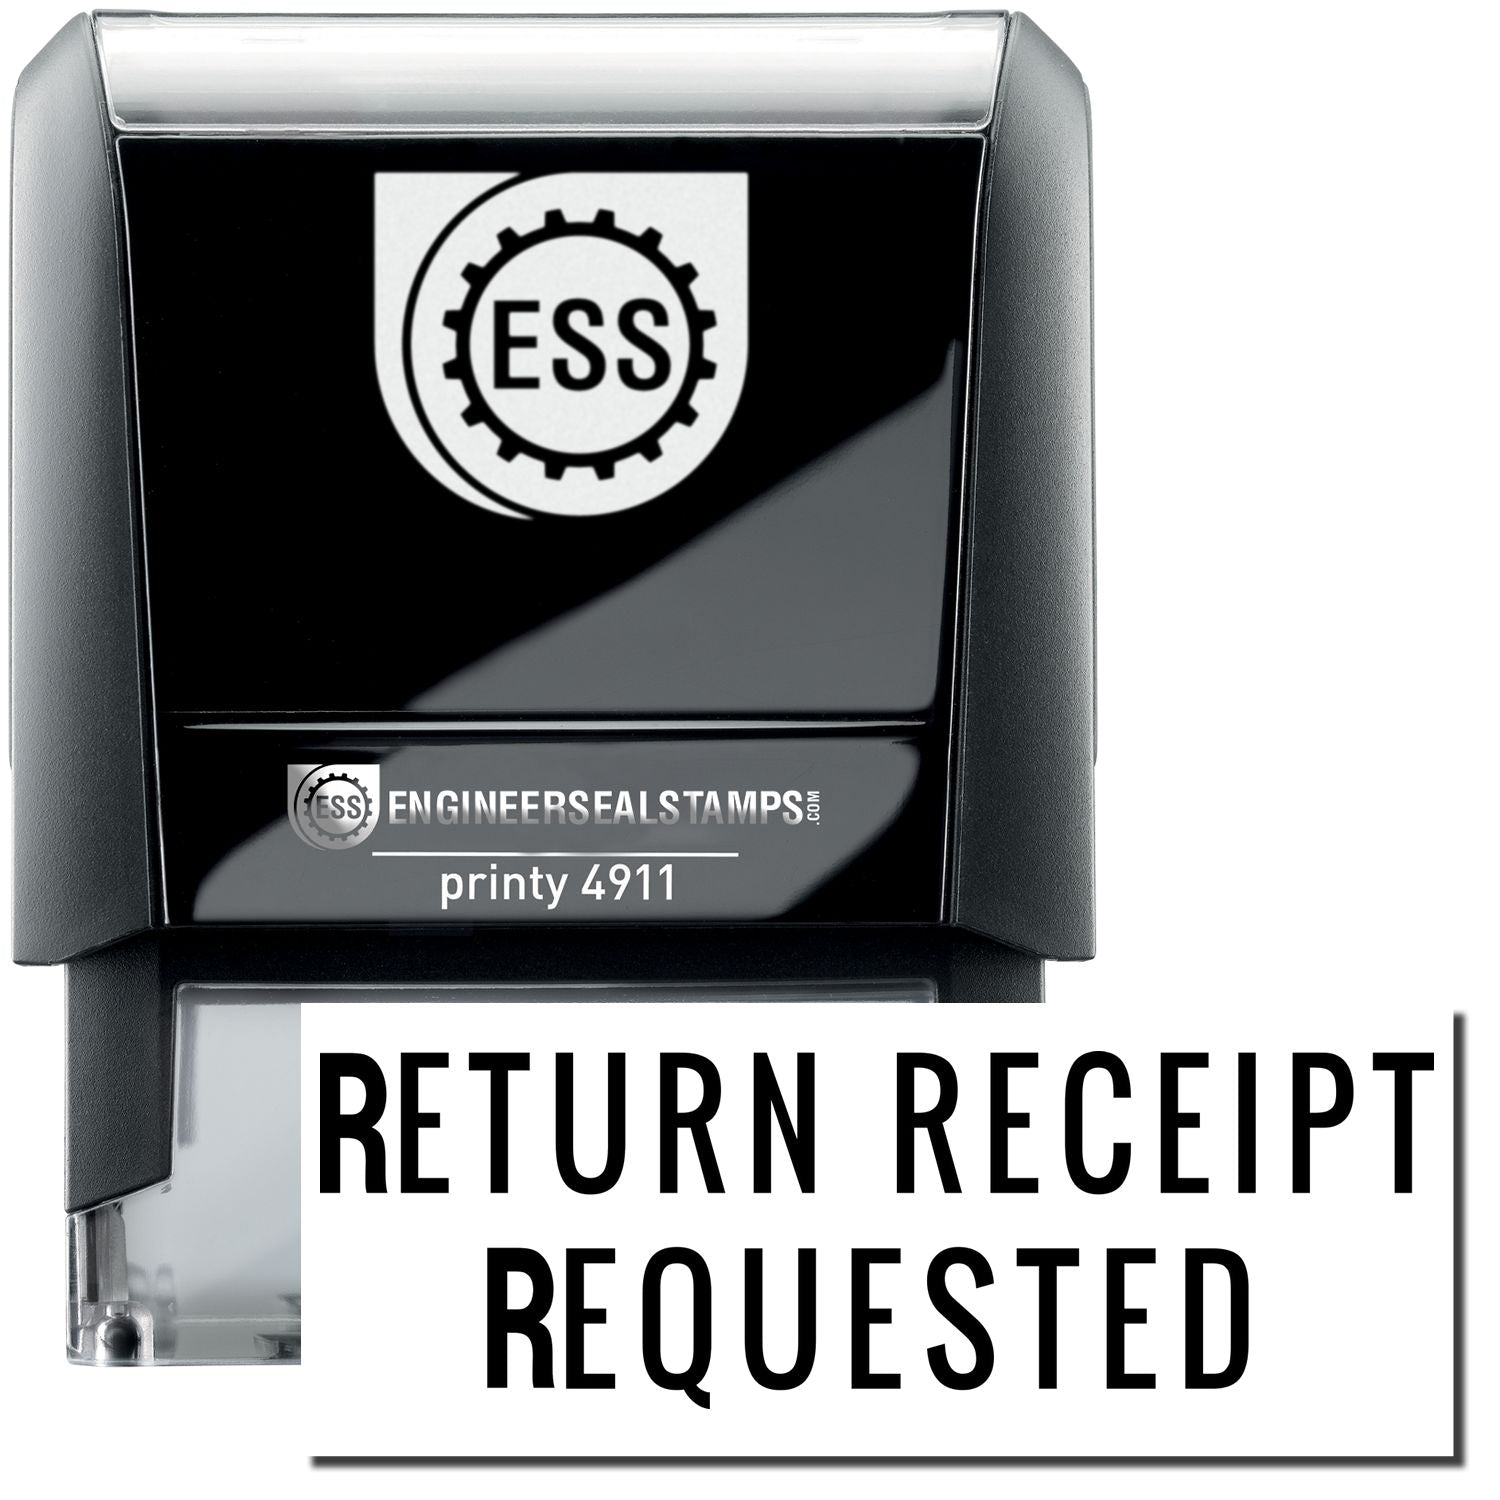 A self-inking stamp with a stamped image showing how the text "RETURN RECEIPT REQUESTED" in a narrow font is displayed after stamping.